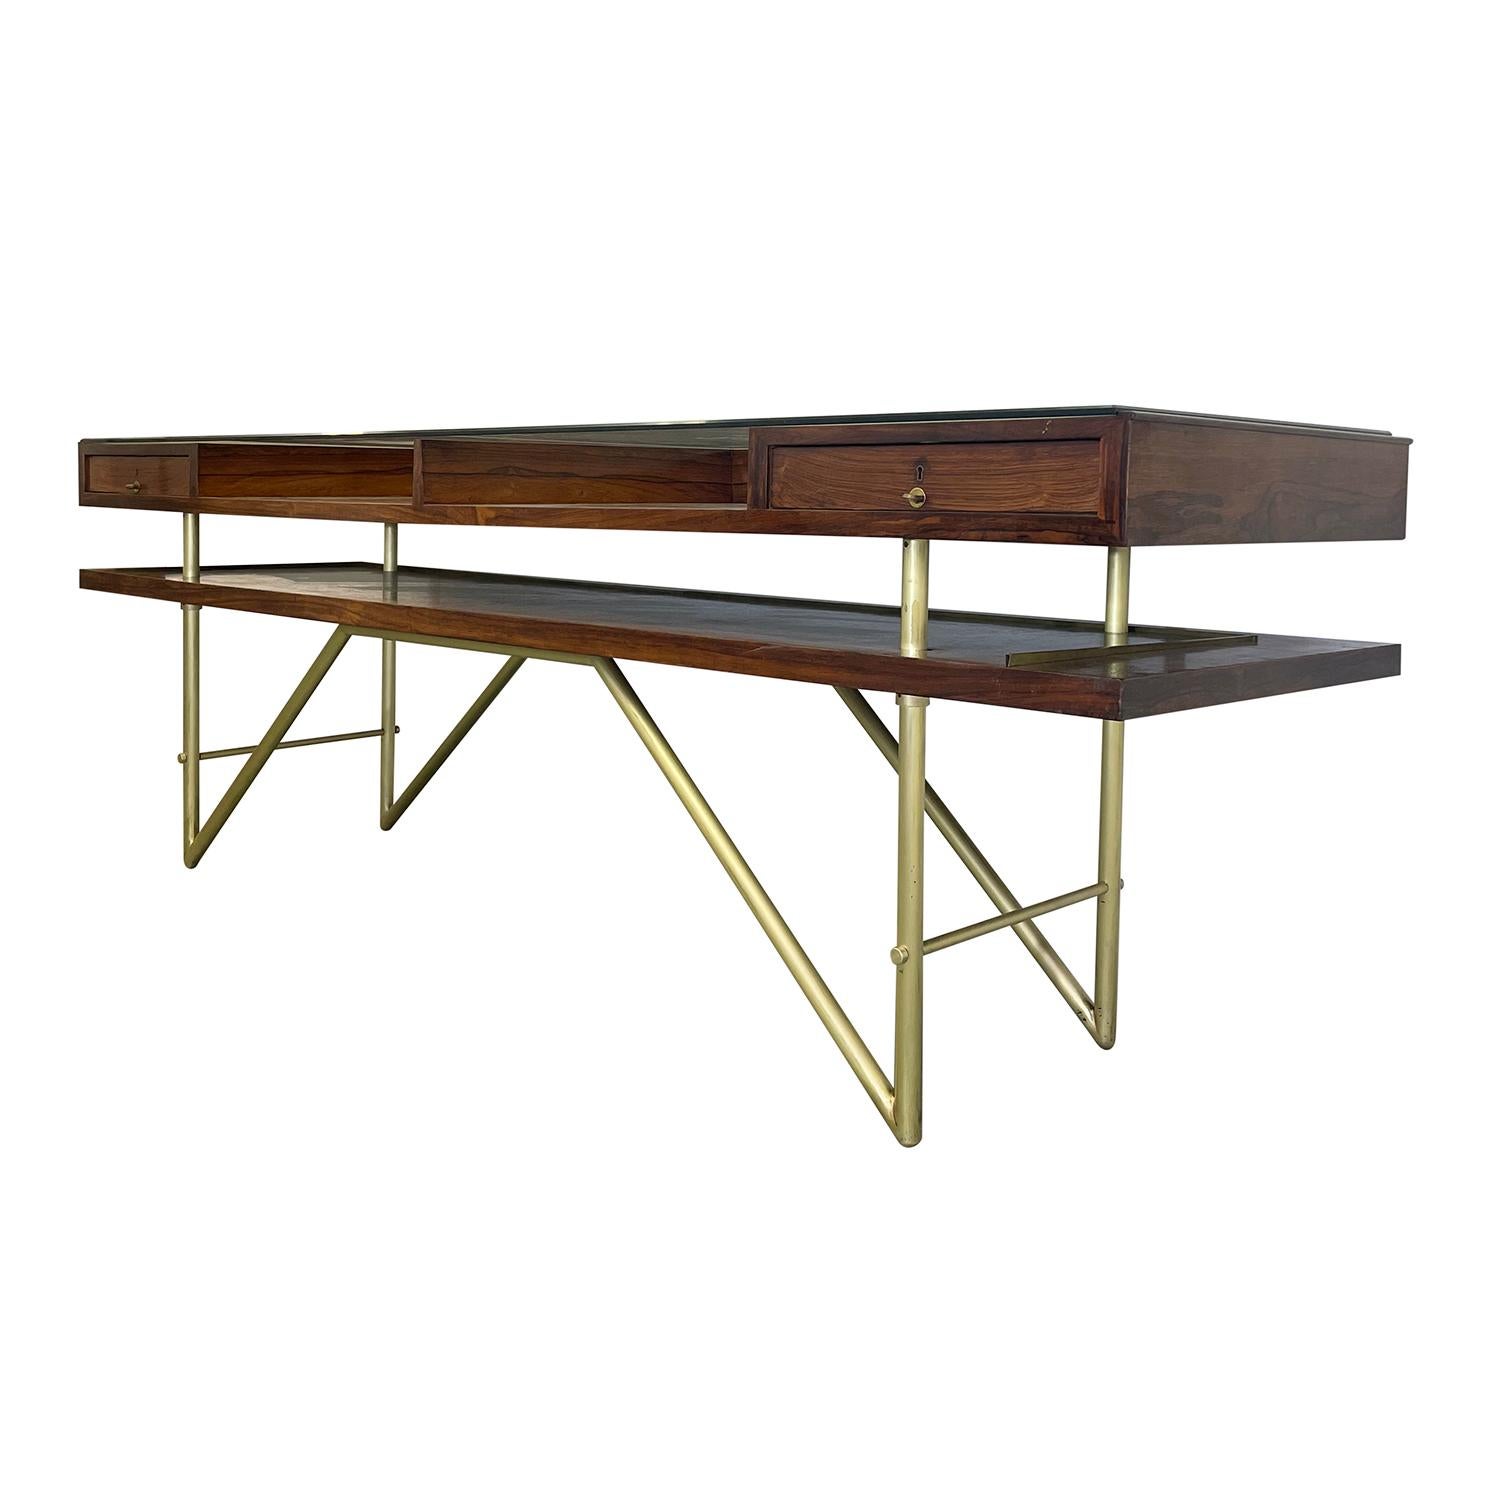 A rectangular, vintage Mid-Century modern Italian sales counter table made of hand crafted polished Rosewood, in good condition. The large buffet serving table is composed with its original clear glass top, a single drawer on each side, and two